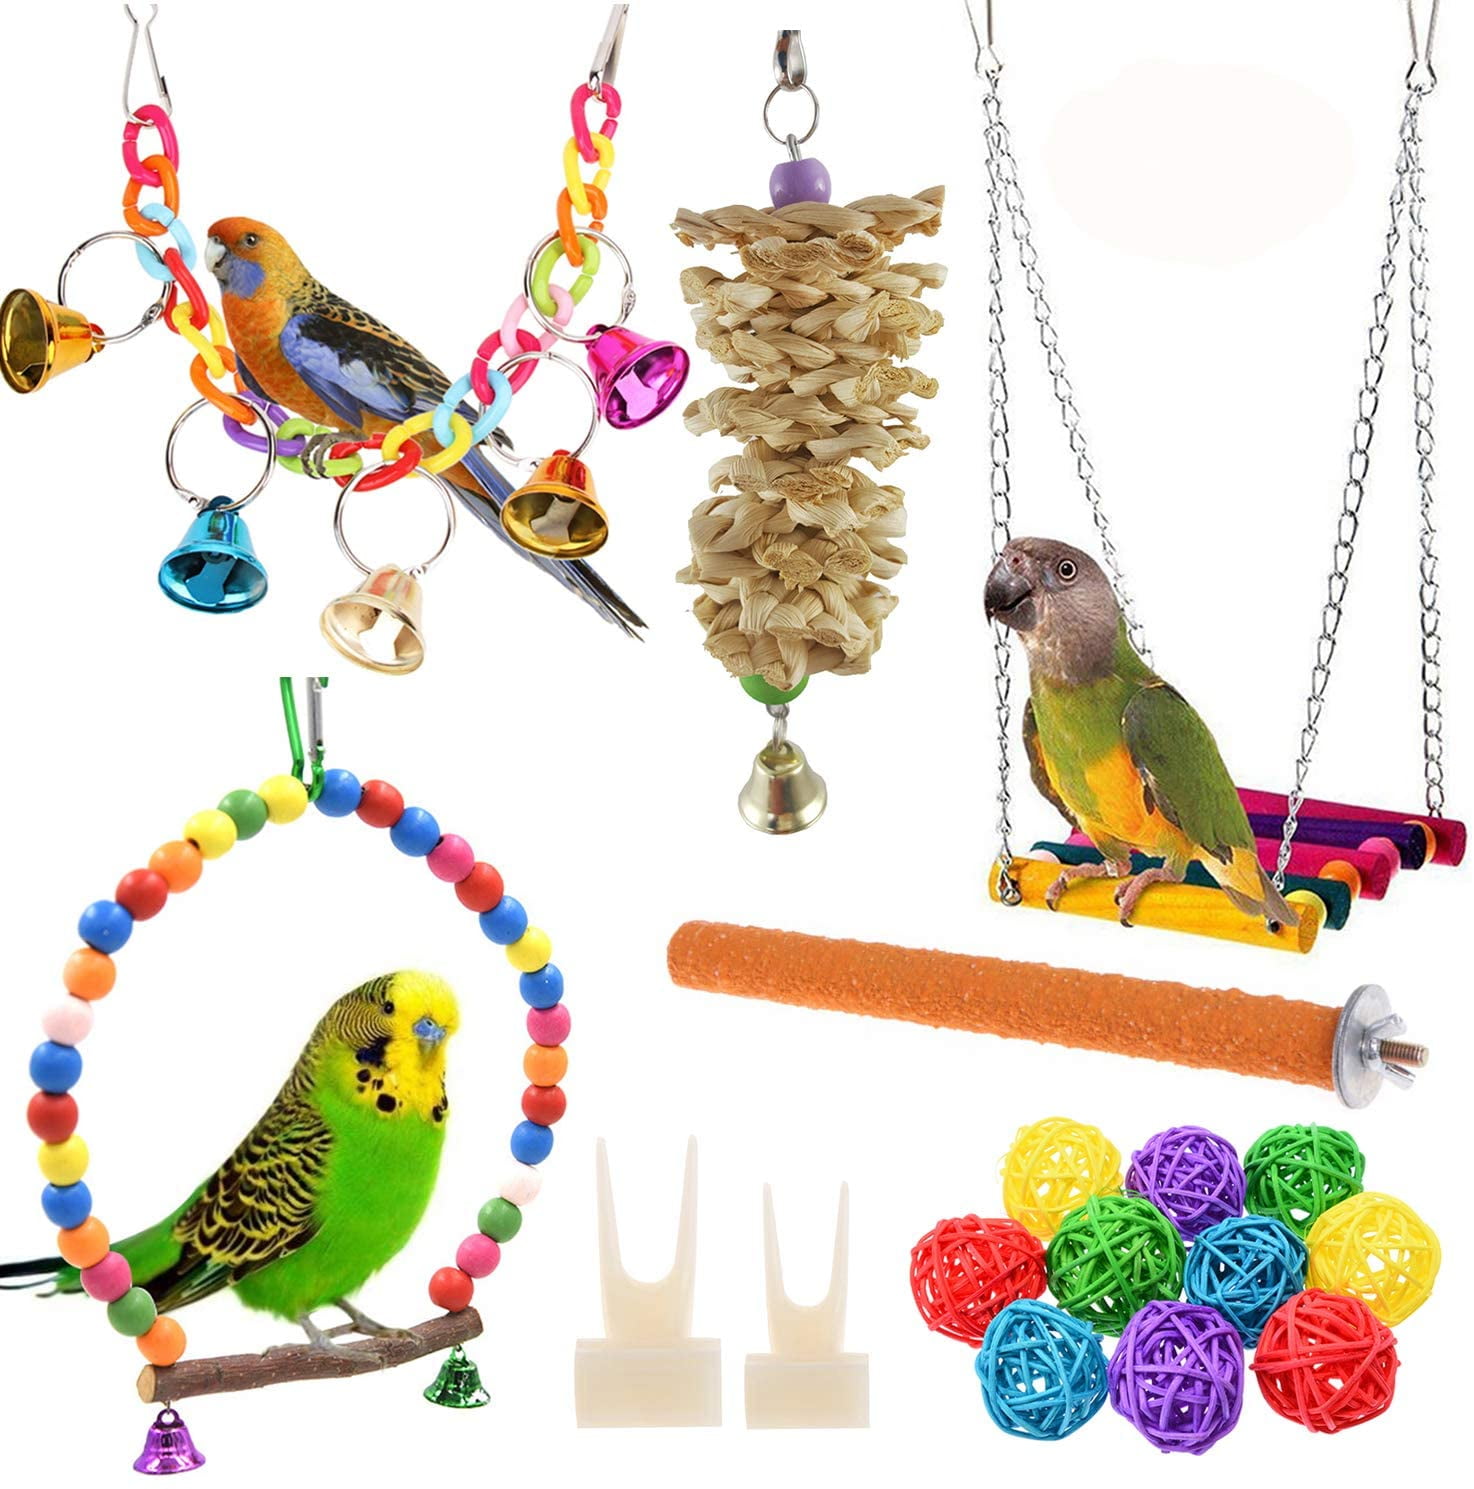 2 Pcs Conures,Love Birds,Small Parakeets Cockatiels Brand Registry Parakeet Toys,Parrot Ladders Swing Toys Bird Hanging Hammock Climbing Ladder Perch Toys Set Cage Accessories for Small Parrots 